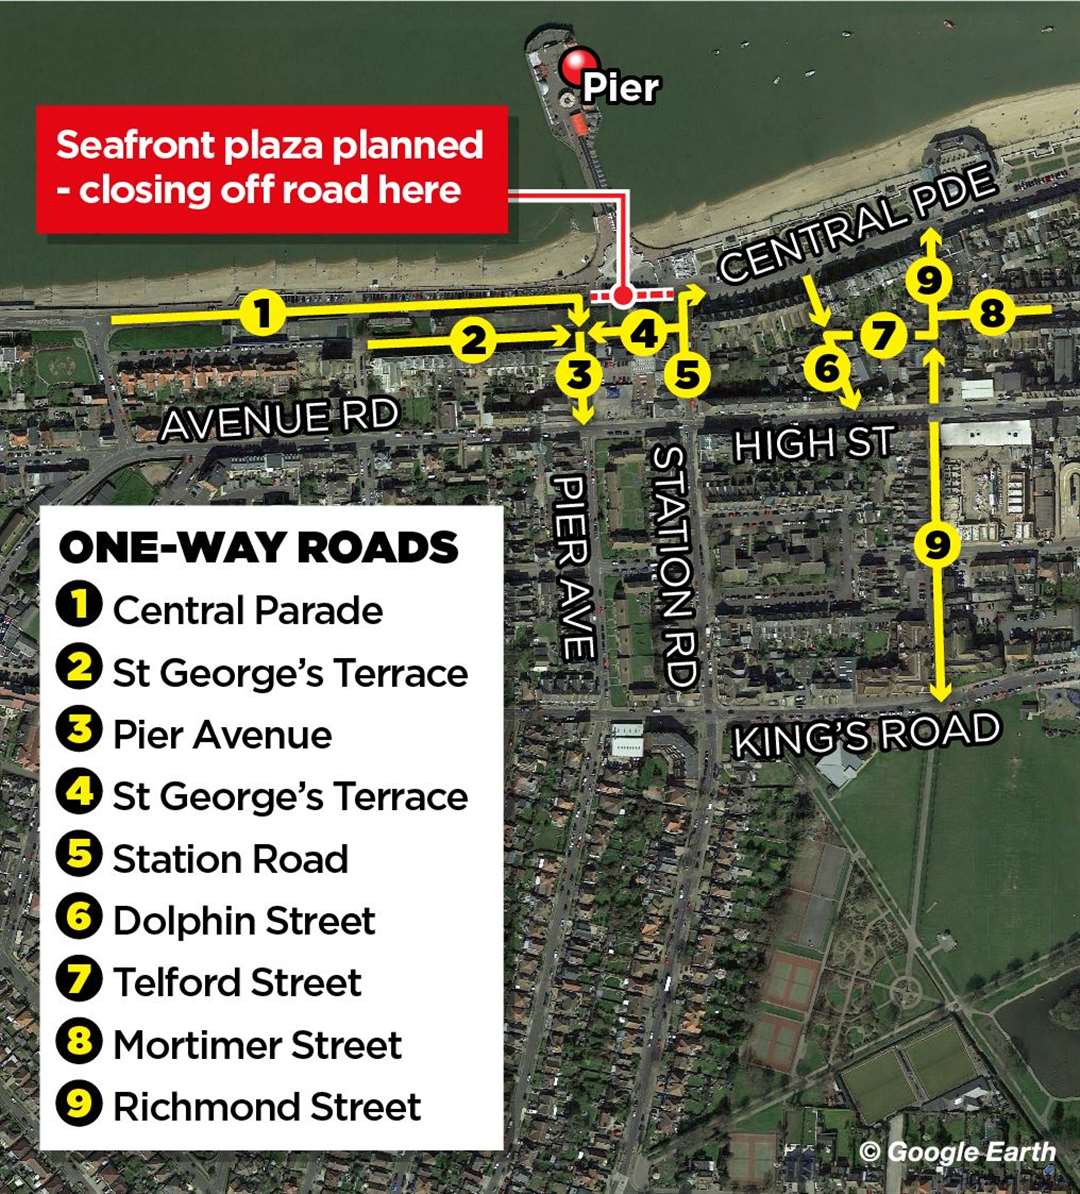 The new one-way system and plaza planned for Herne Bay seafront